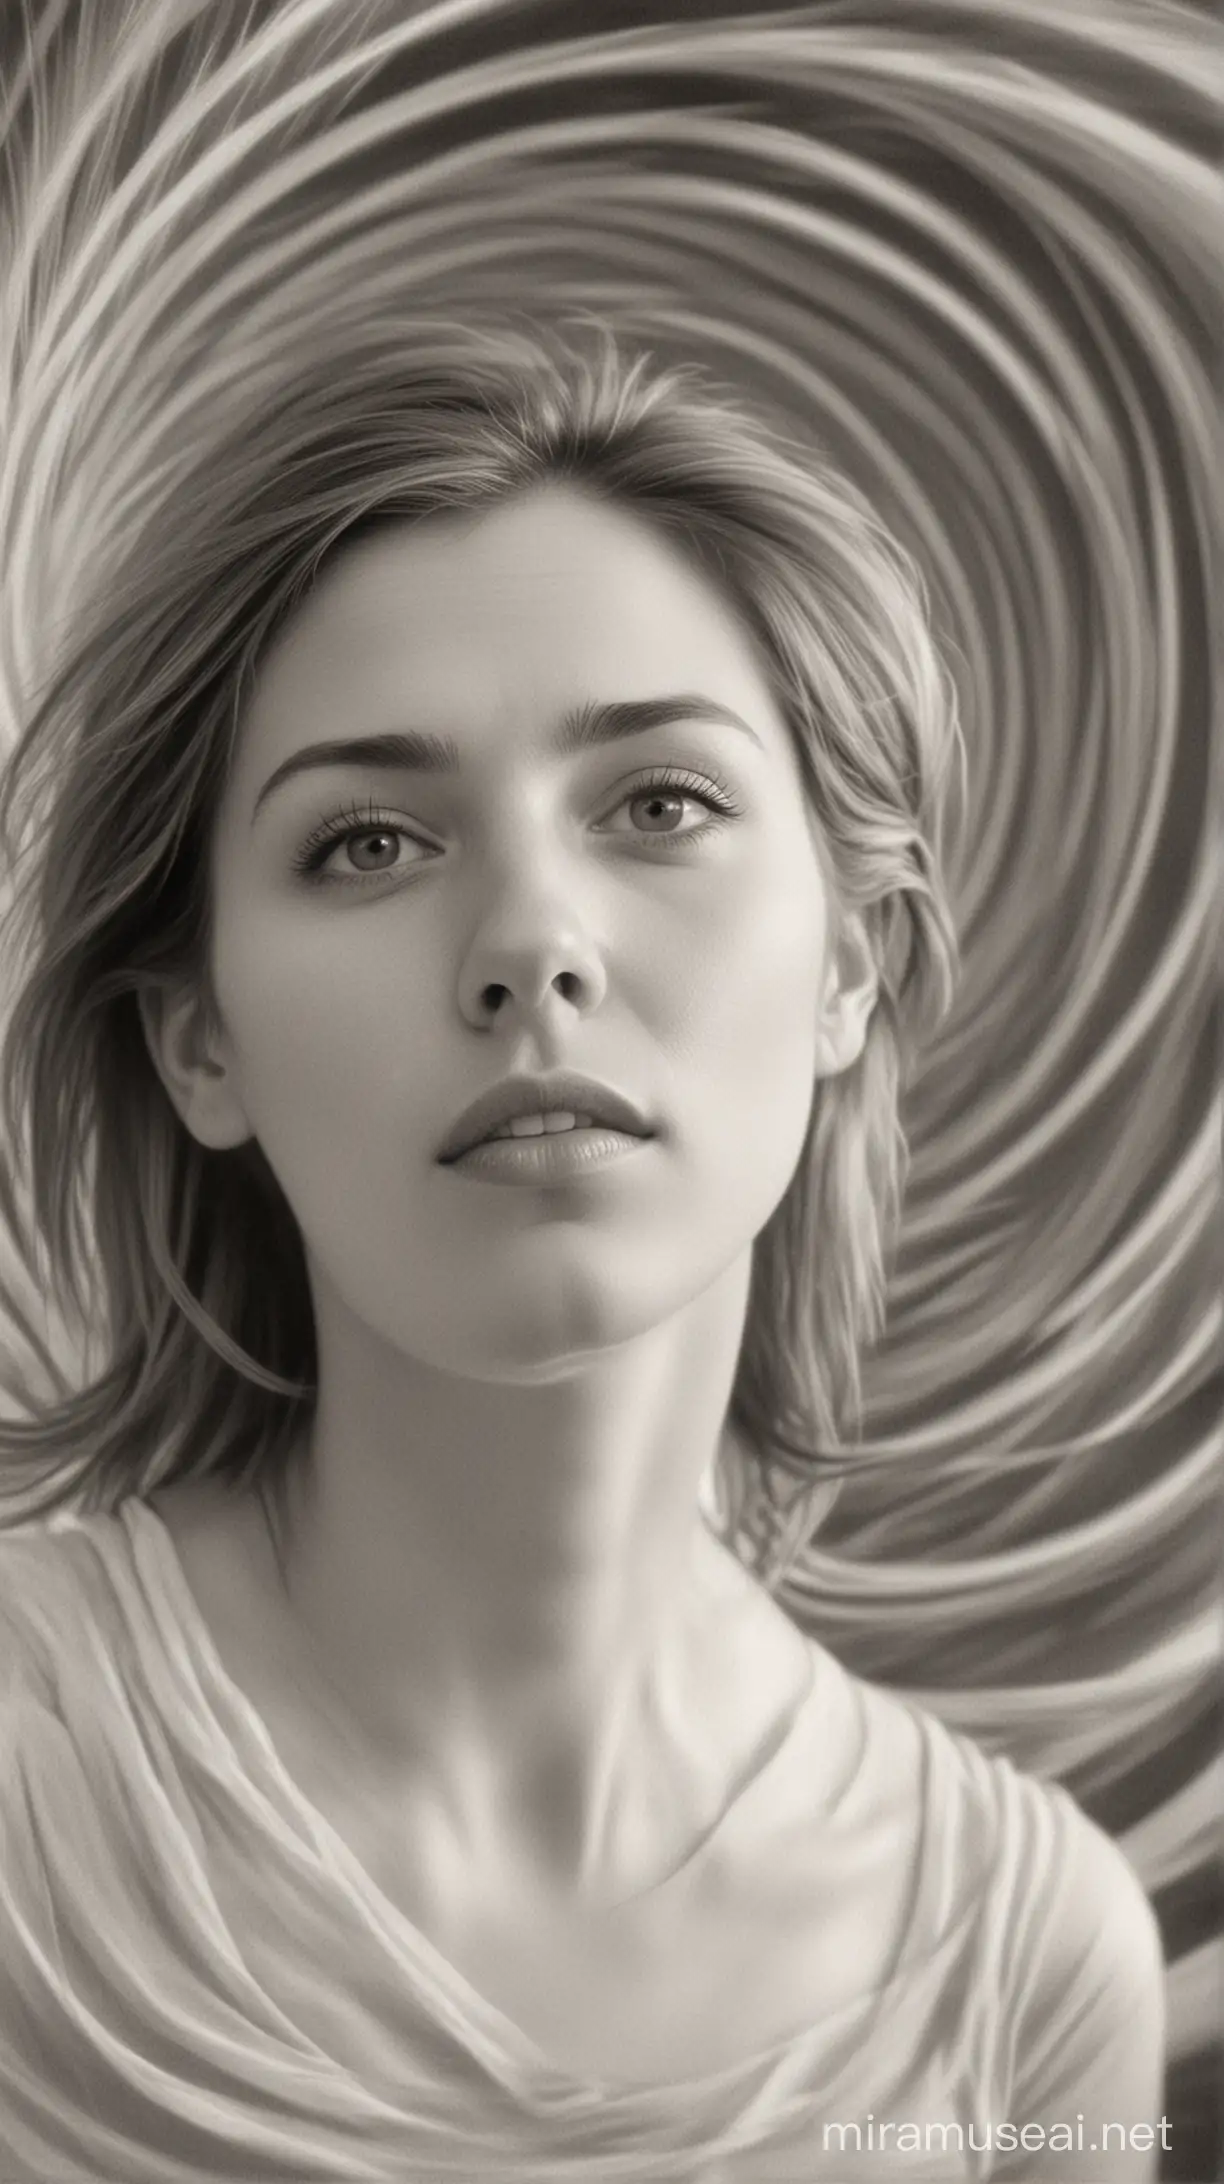 Captivating BW Pencil Drawing Woman in Rotating Vortex